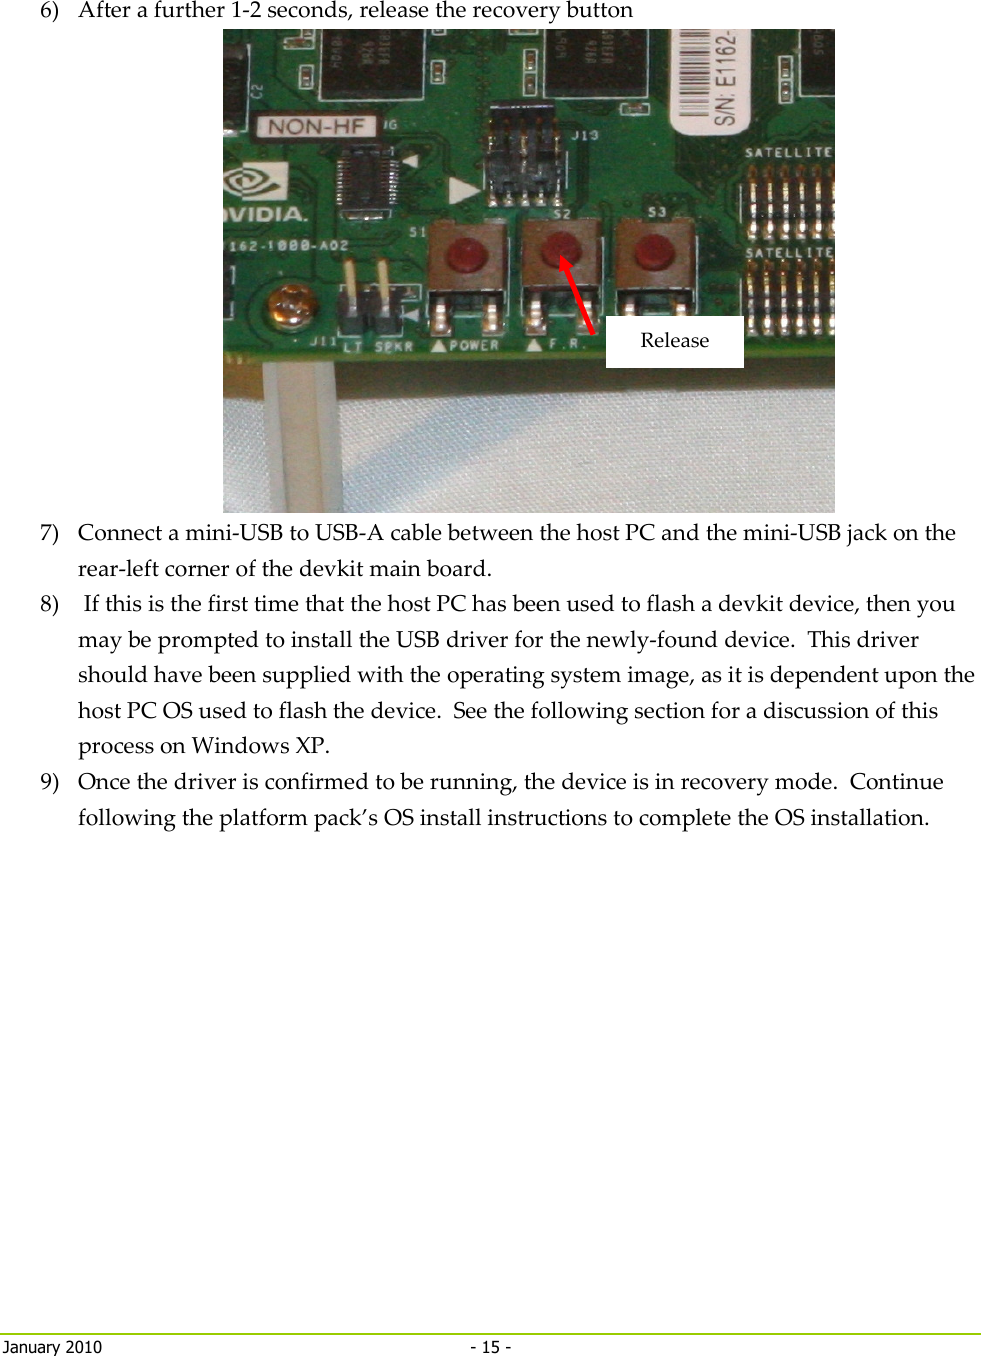     January 2010  - 15 -   6) After a further 1-2 seconds, release the recovery button  7) Connect a mini-USB to USB-A cable between the host PC and the mini-USB jack on the rear-left corner of the devkit main board. 8)  If this is the first time that the host PC has been used to flash a devkit device, then you may be prompted to install the USB driver for the newly-found device.  This driver should have been supplied with the operating system image, as it is dependent upon the host PC OS used to flash the device.  See the following section for a discussion of this process on Windows XP. 9) Once the driver is confirmed to be running, the device is in recovery mode.  Continue following the platform pack’s OS install instructions to complete the OS installation.   Release 